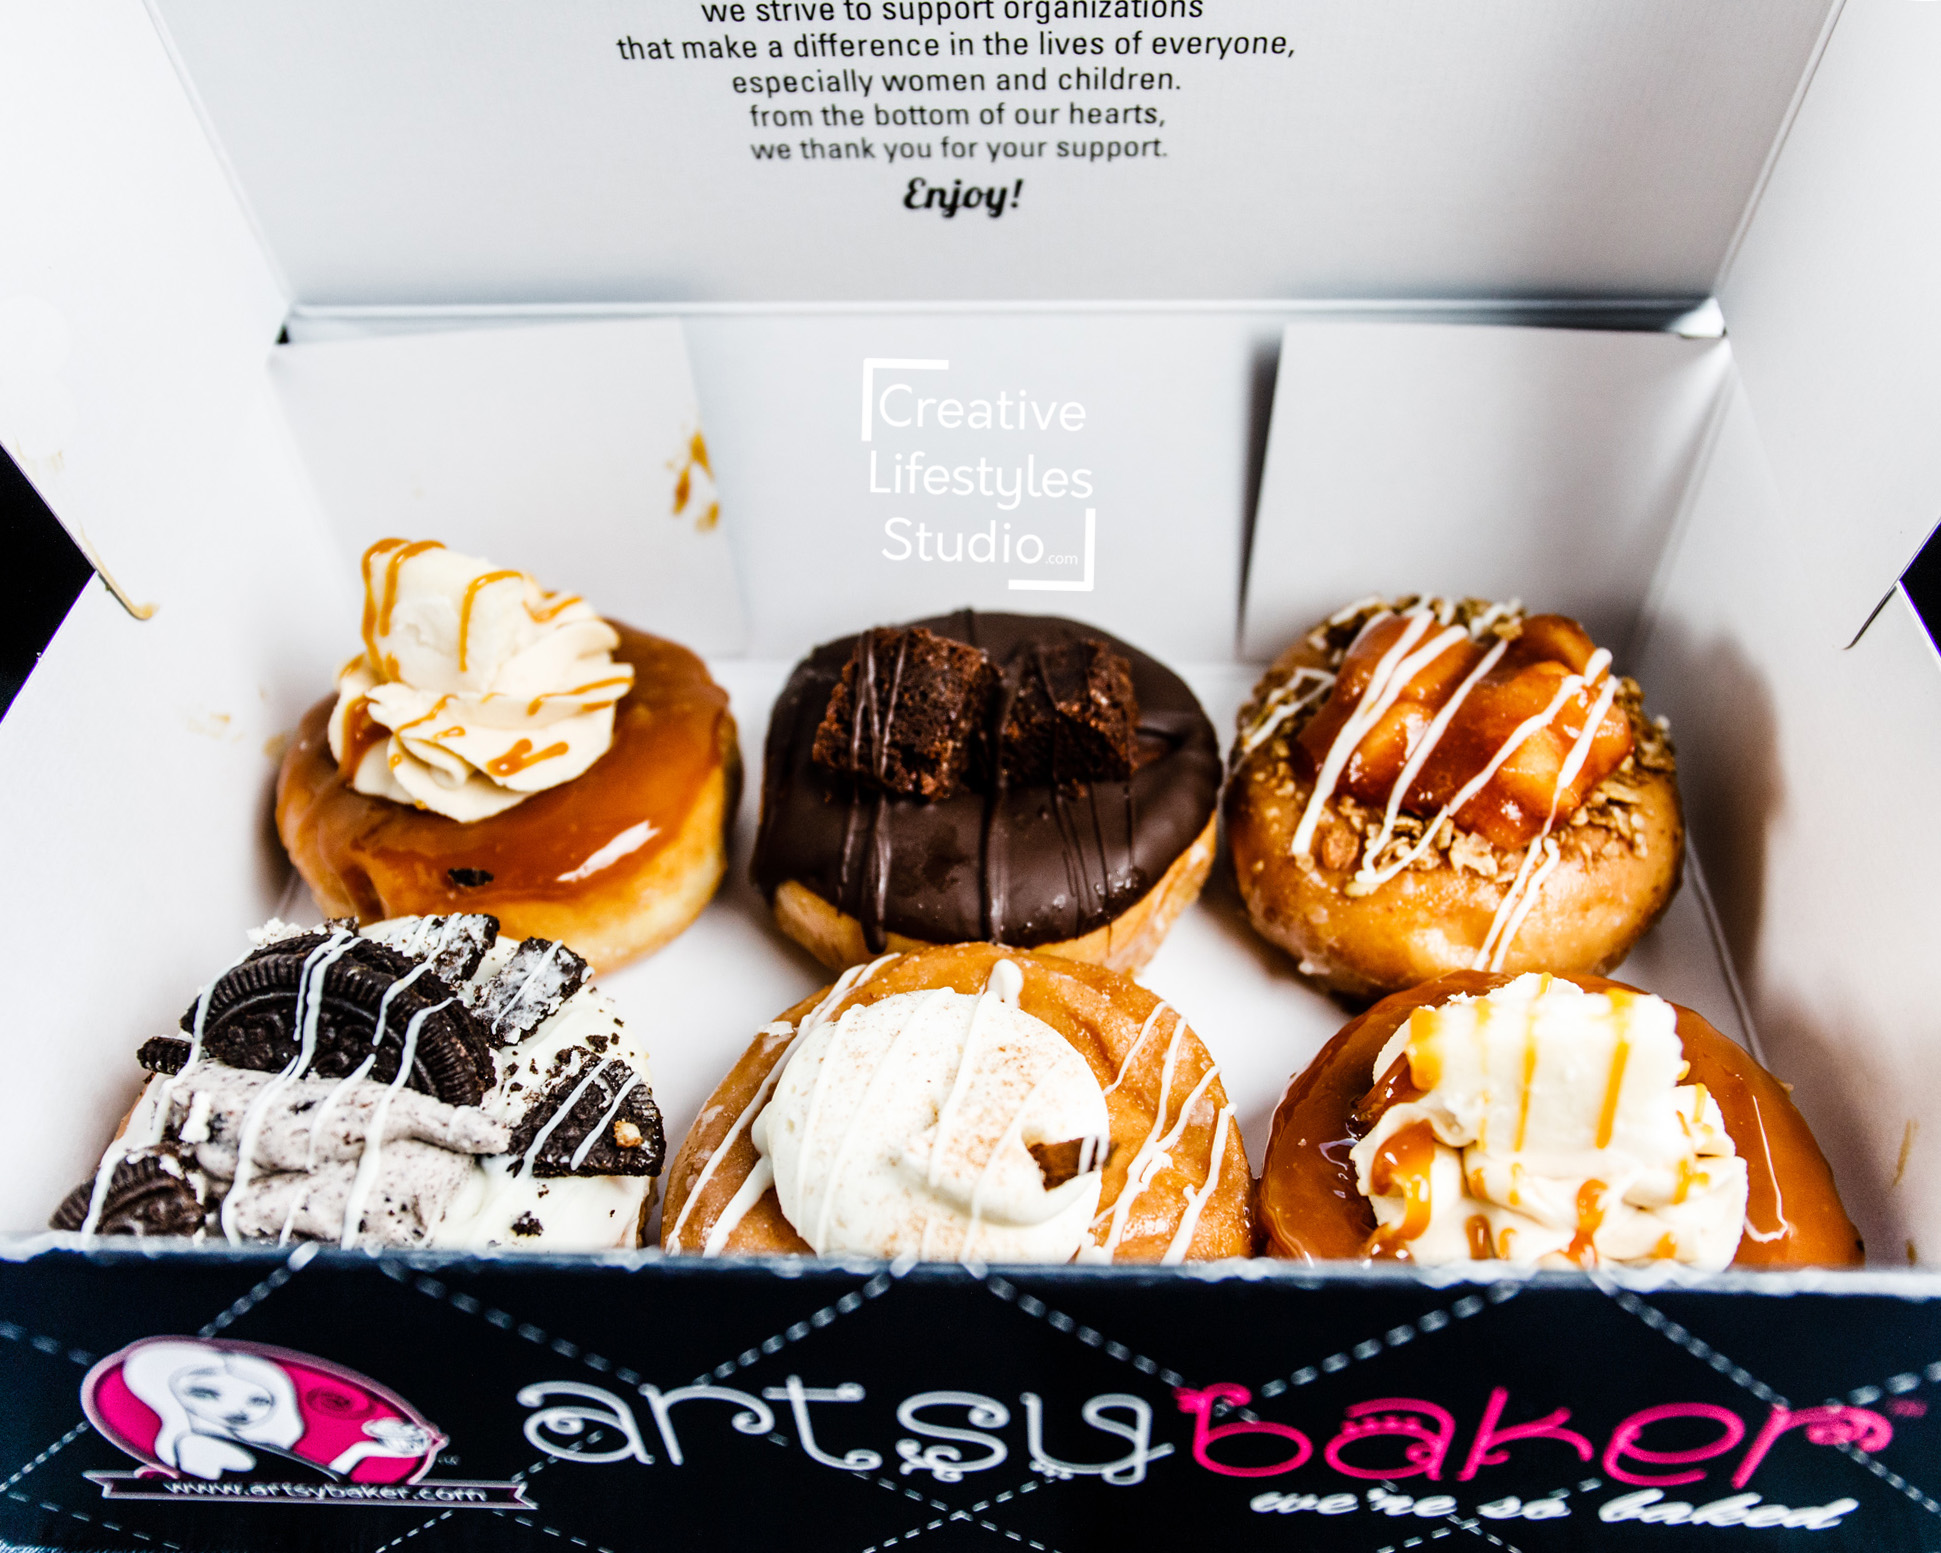 decked out donuts-105.jpg